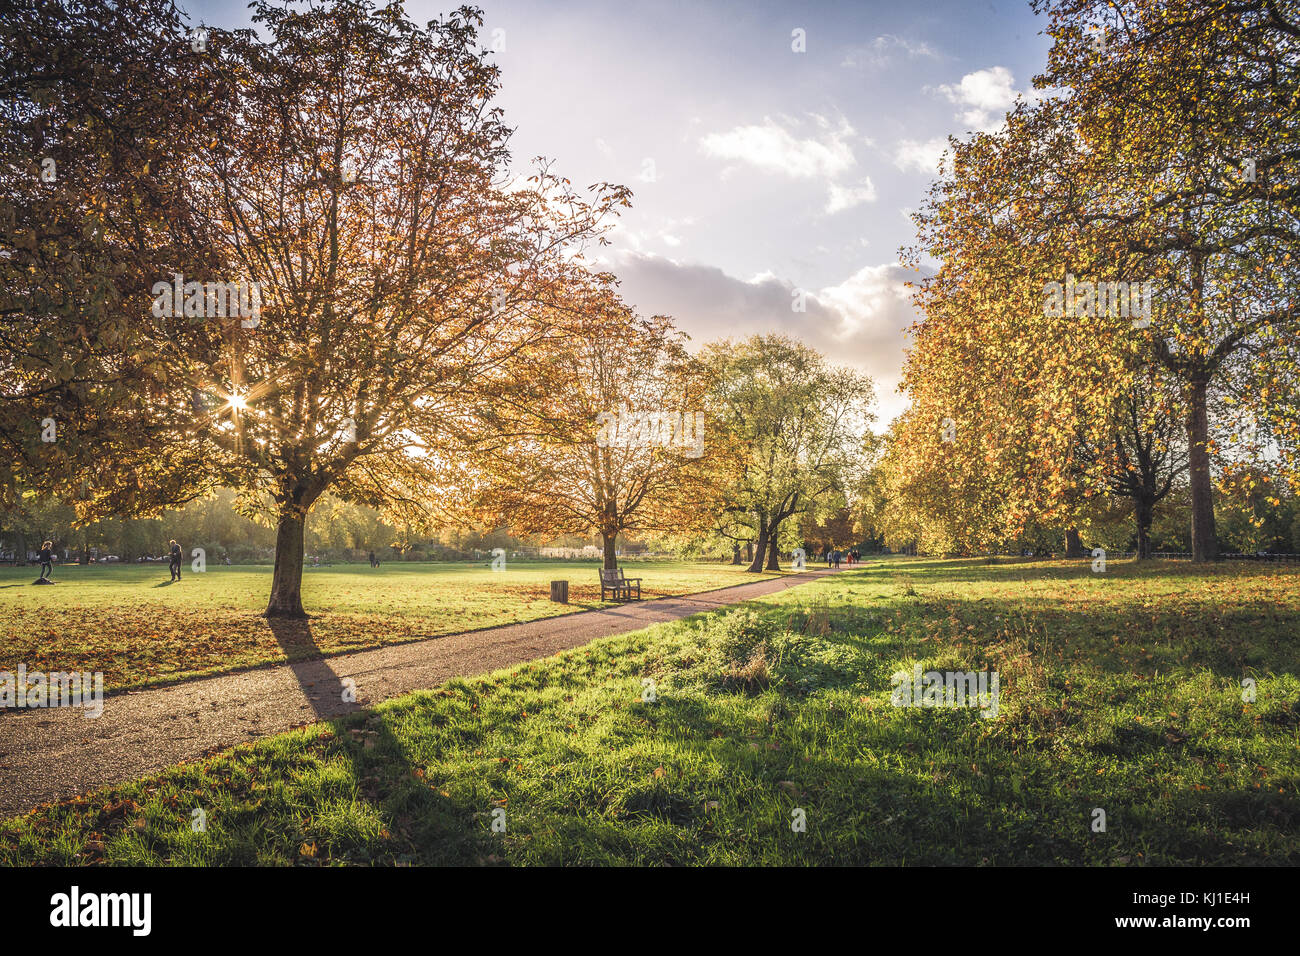 Classic autumn landscape with colorful leaves and the sunshine streaming through the trees. Stock Photo